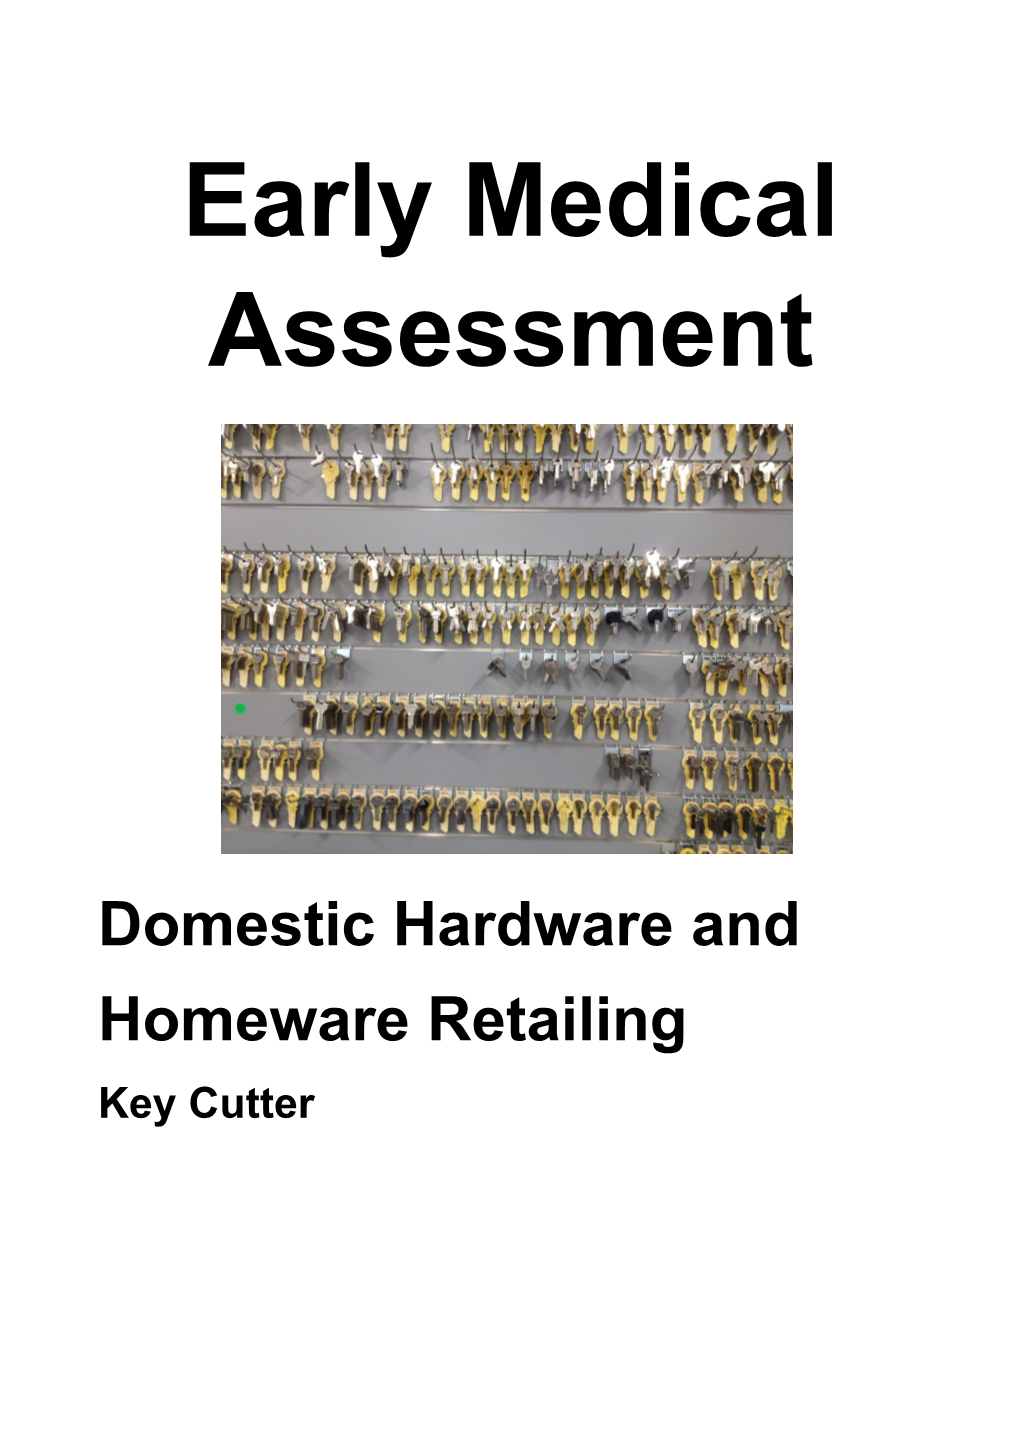 Domestic Hardware and Homeware Retailing - Key Cutter